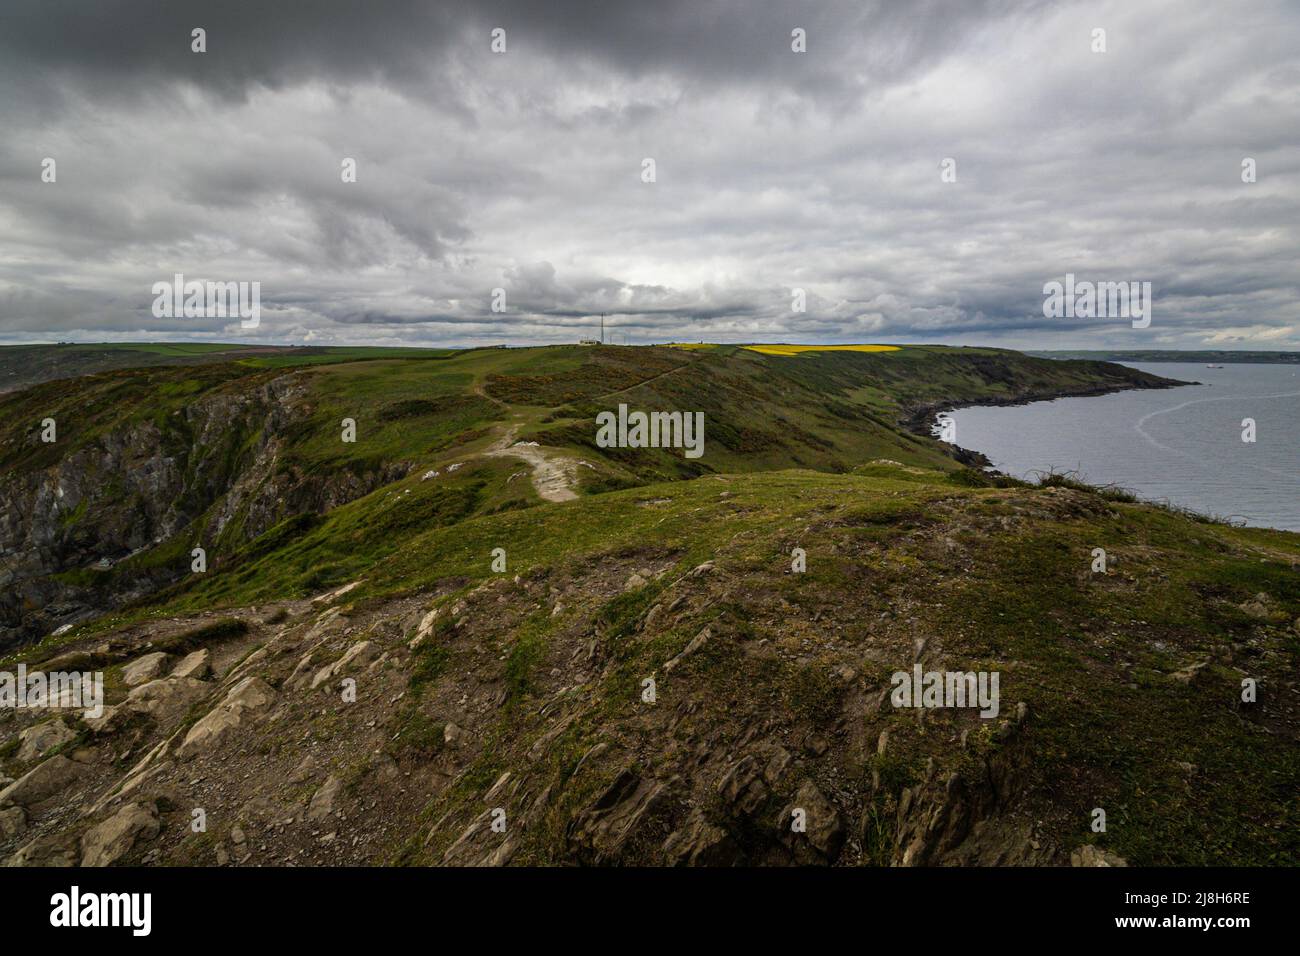 view of the landscape from Rame Head Peninsula, Cornwall, United Kingdom Stock Photo